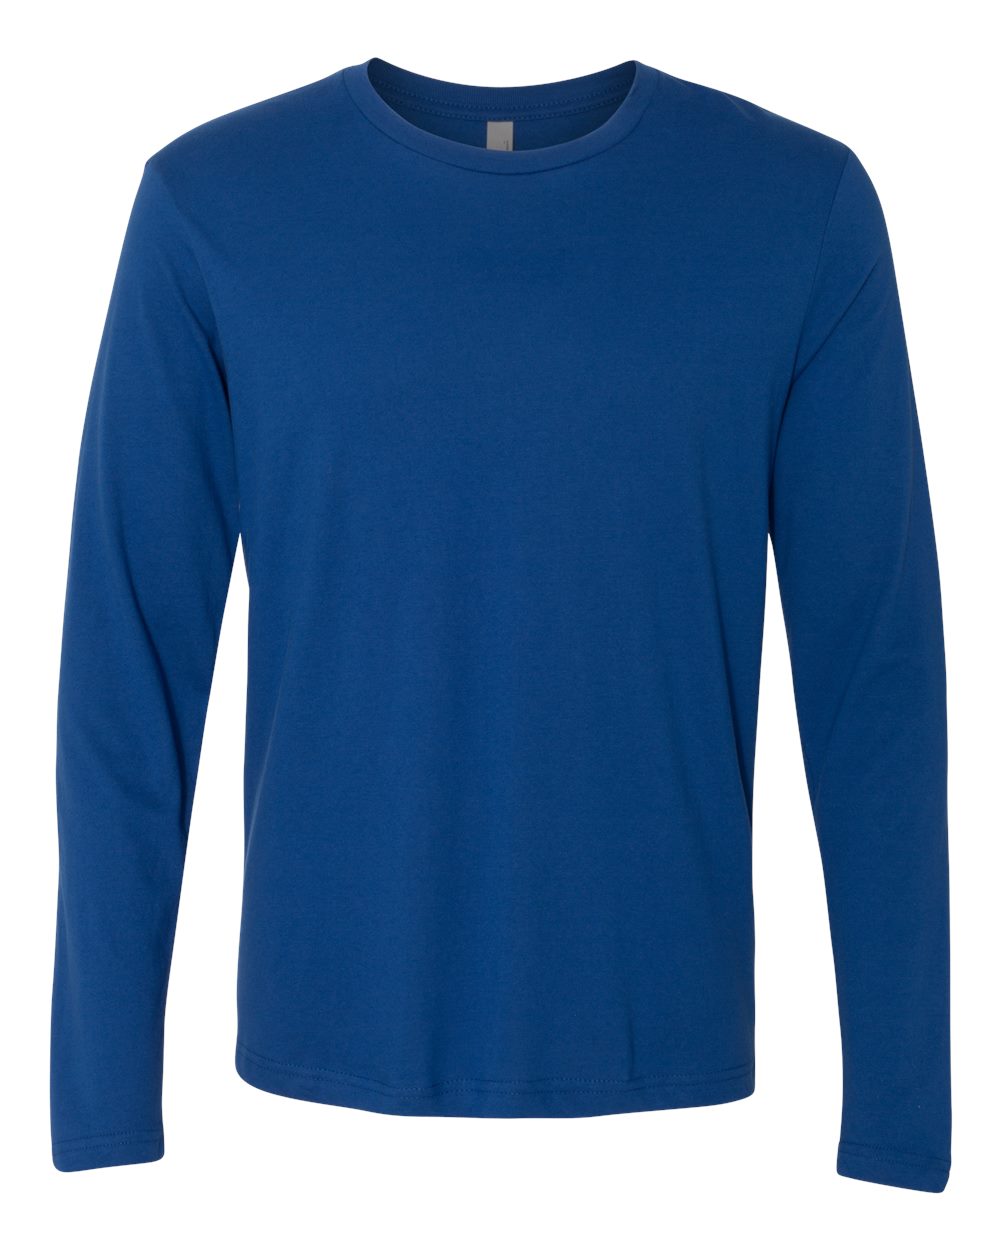 Next Level N3601 Men's Premium Fitted Long Sleeve Crew Tee